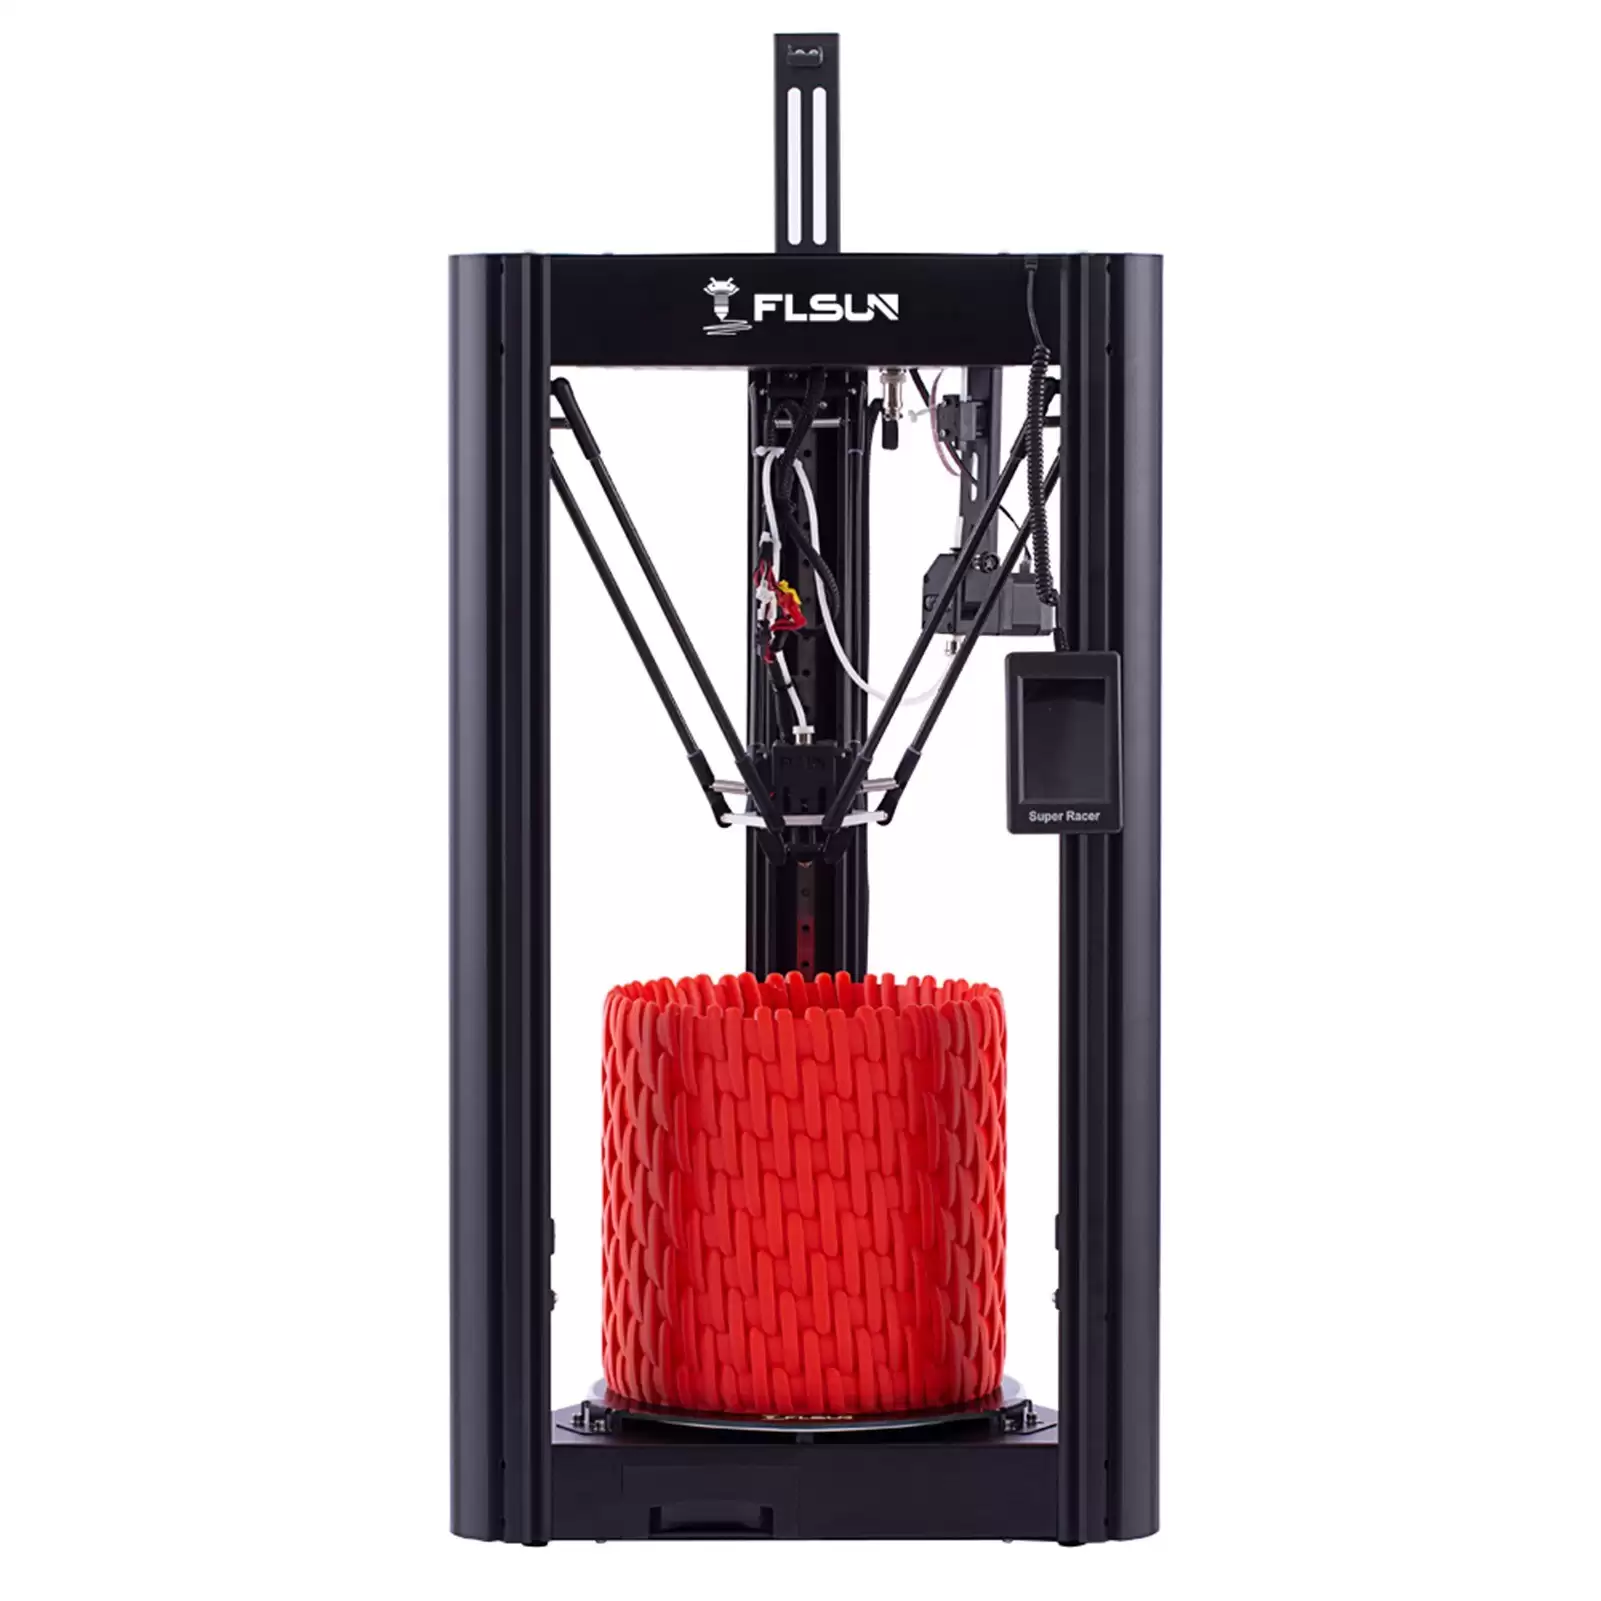 Order In Just $402.23 Flsun Sr Delta 3d Printer 260x330mm Printing Size With This Tomtop Discount Voucher